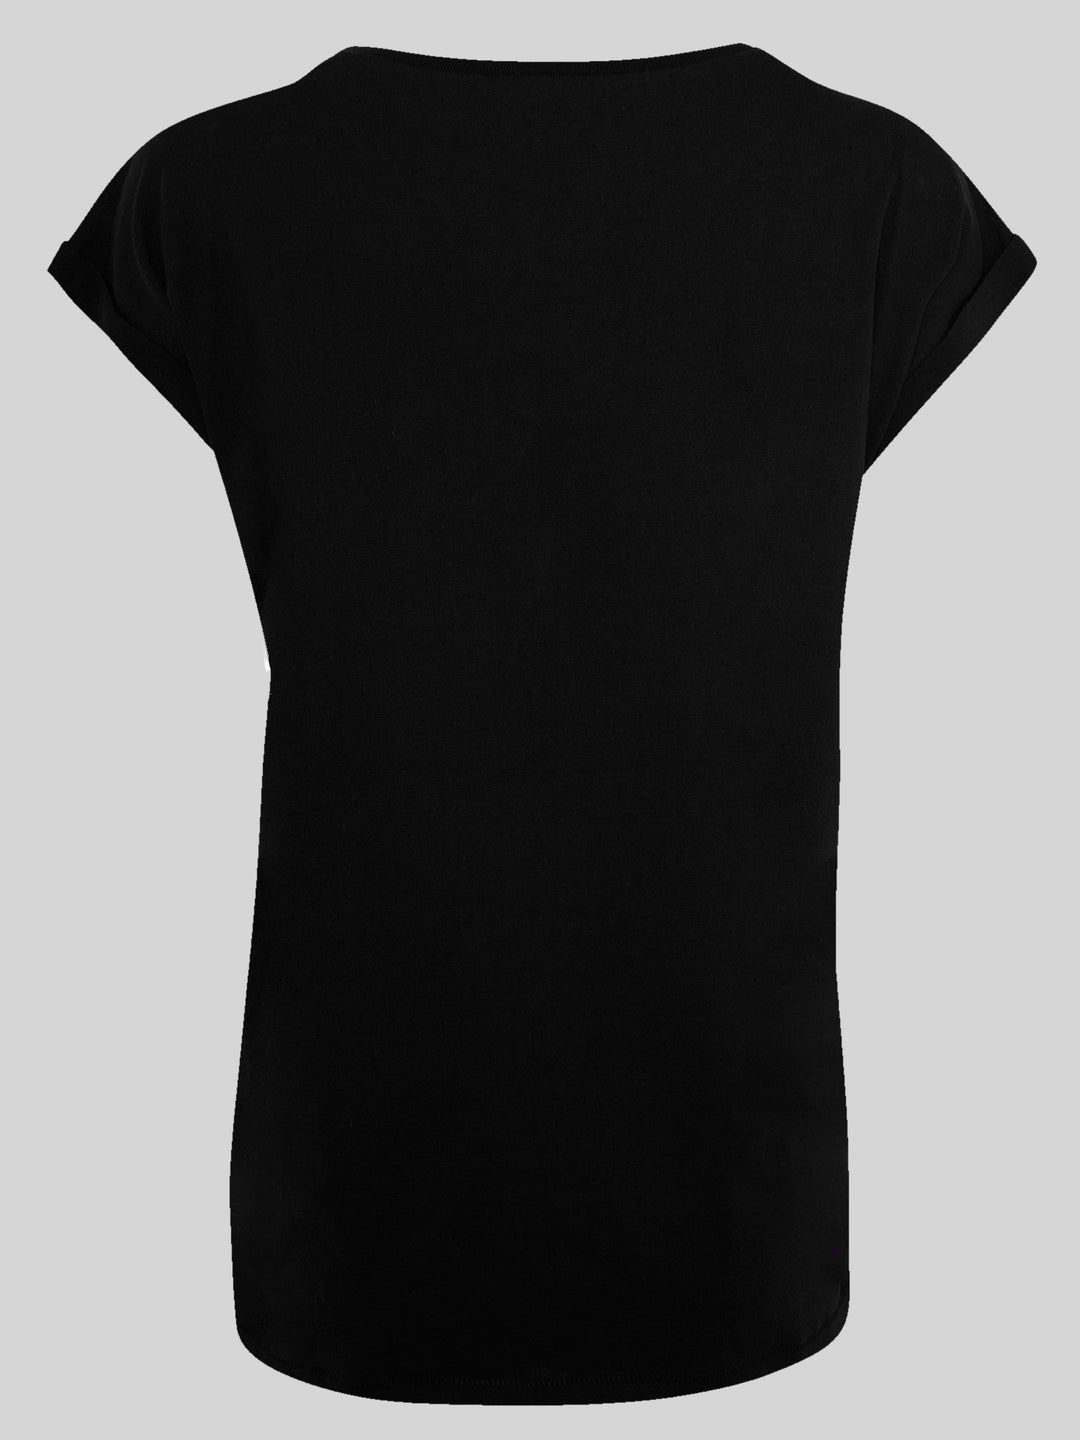 ACDC Back in Black with Ladies Extended Shoulder Tee